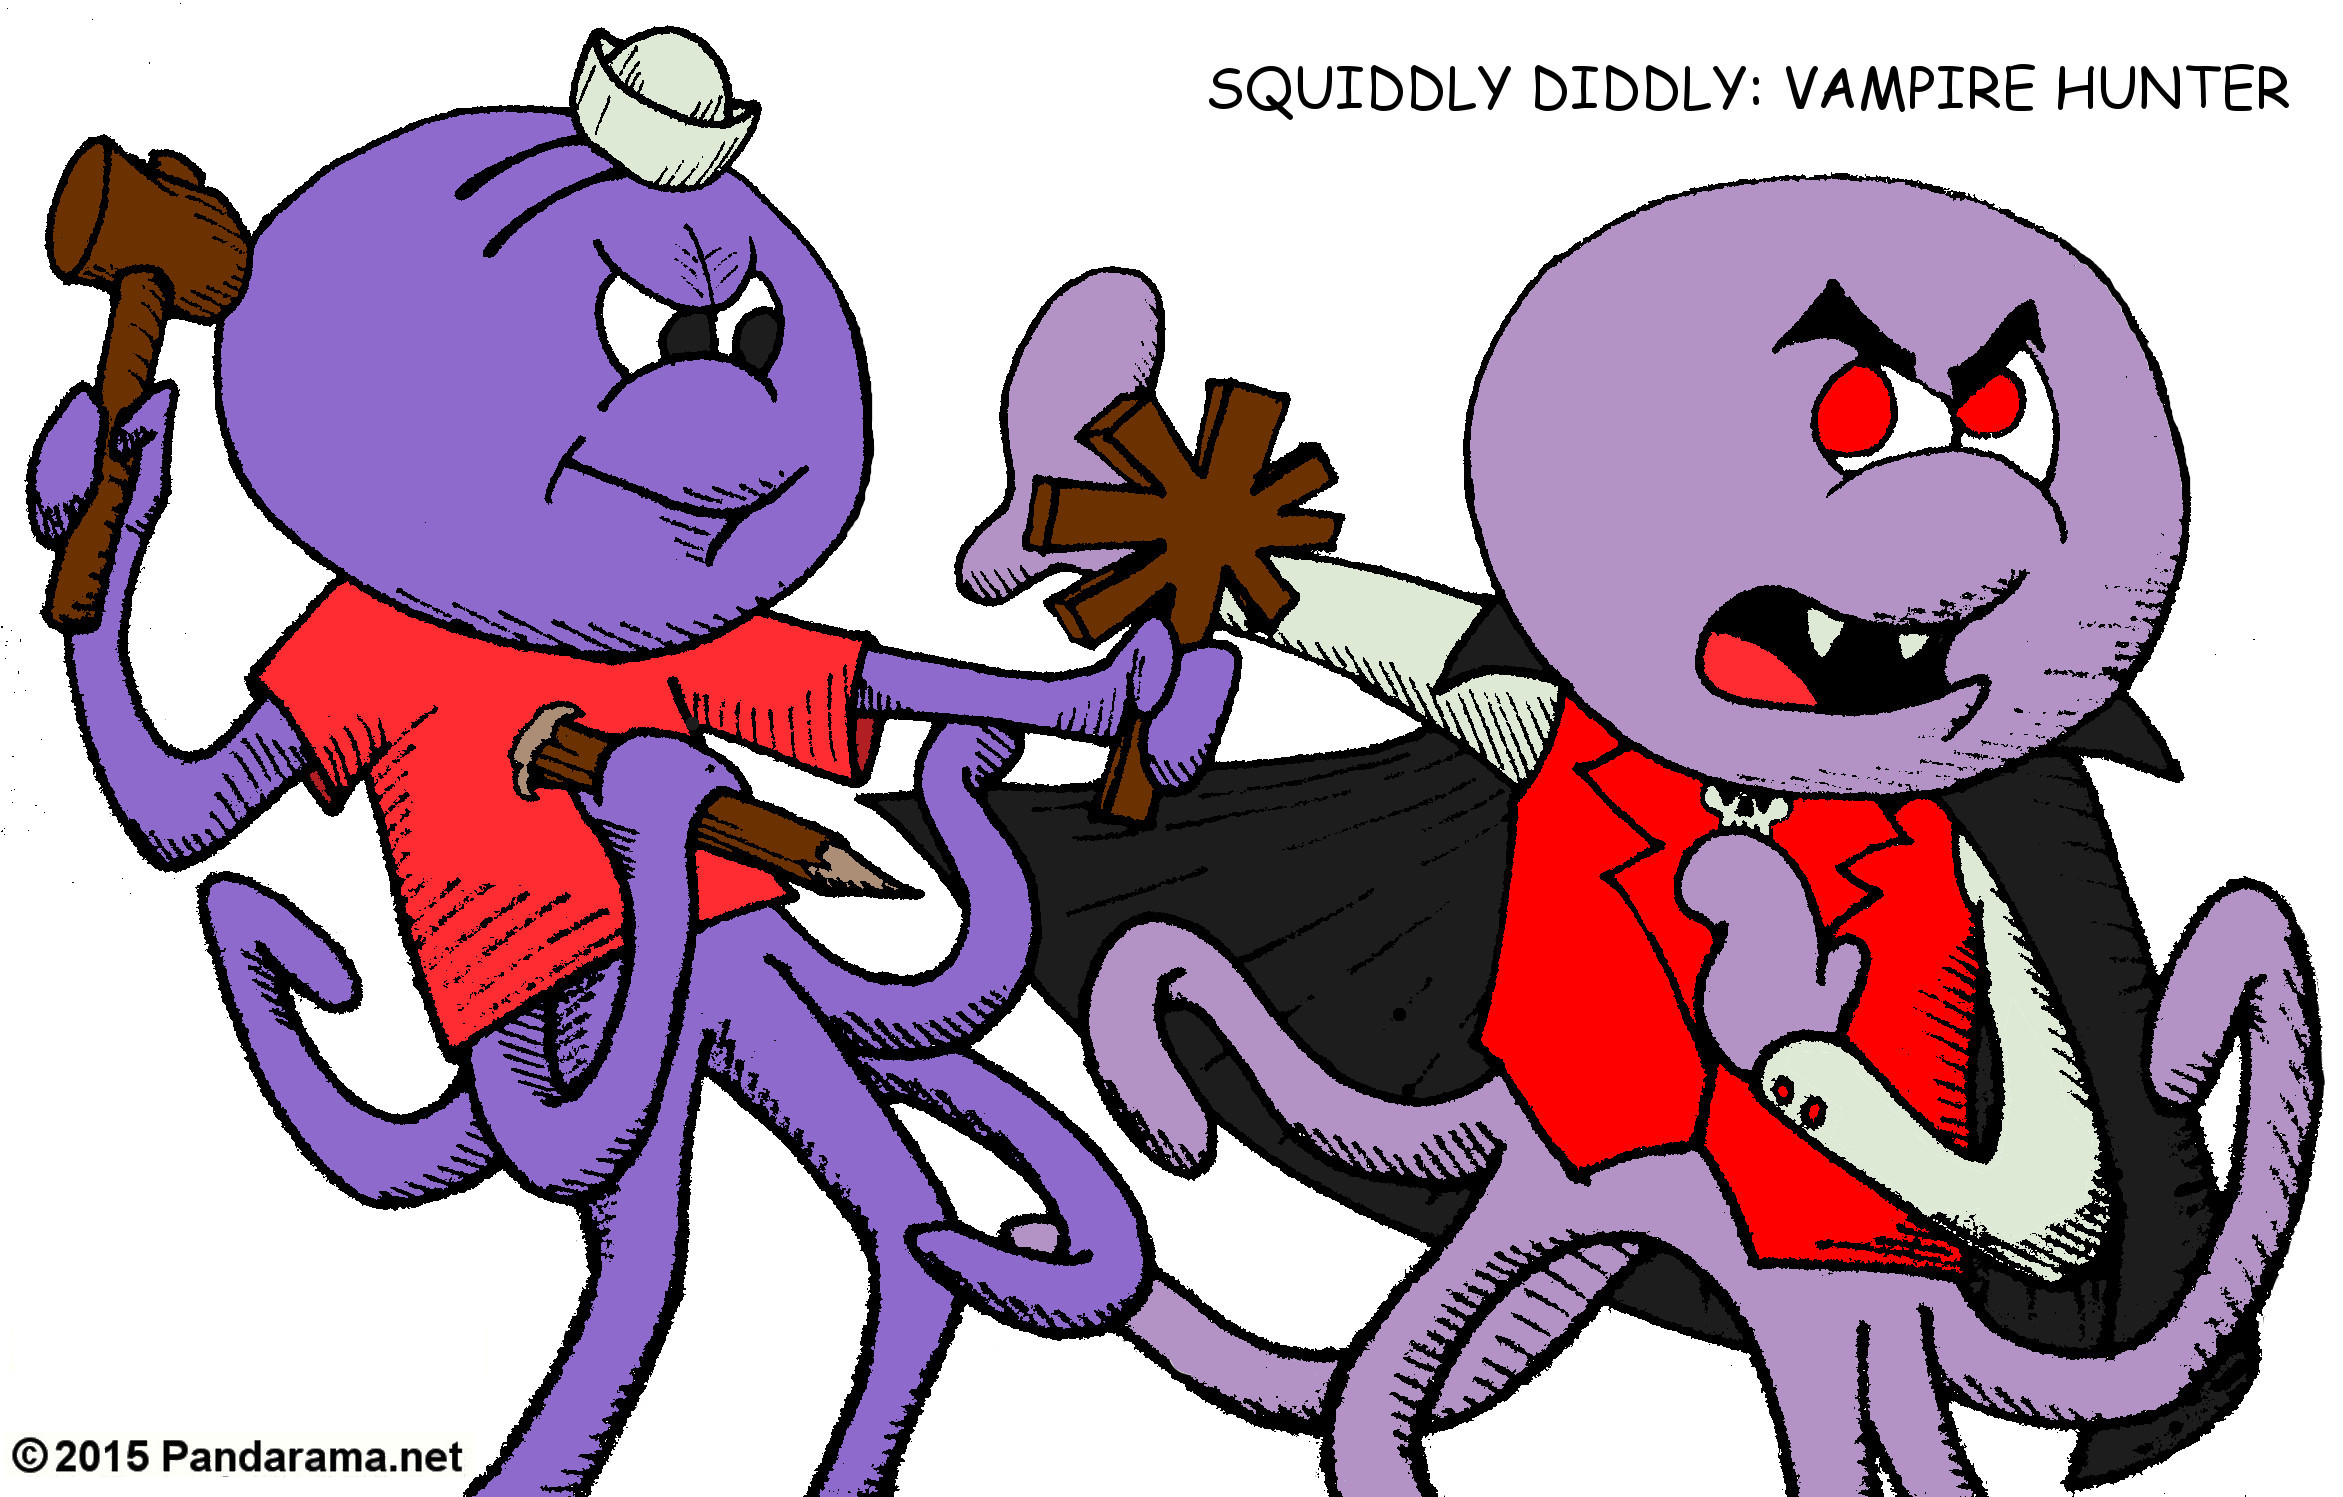 Pandarama.net Pandarama satirical cartoon of Squiddly Diddly showing a crucifix with extra limbs to a vampire squid.